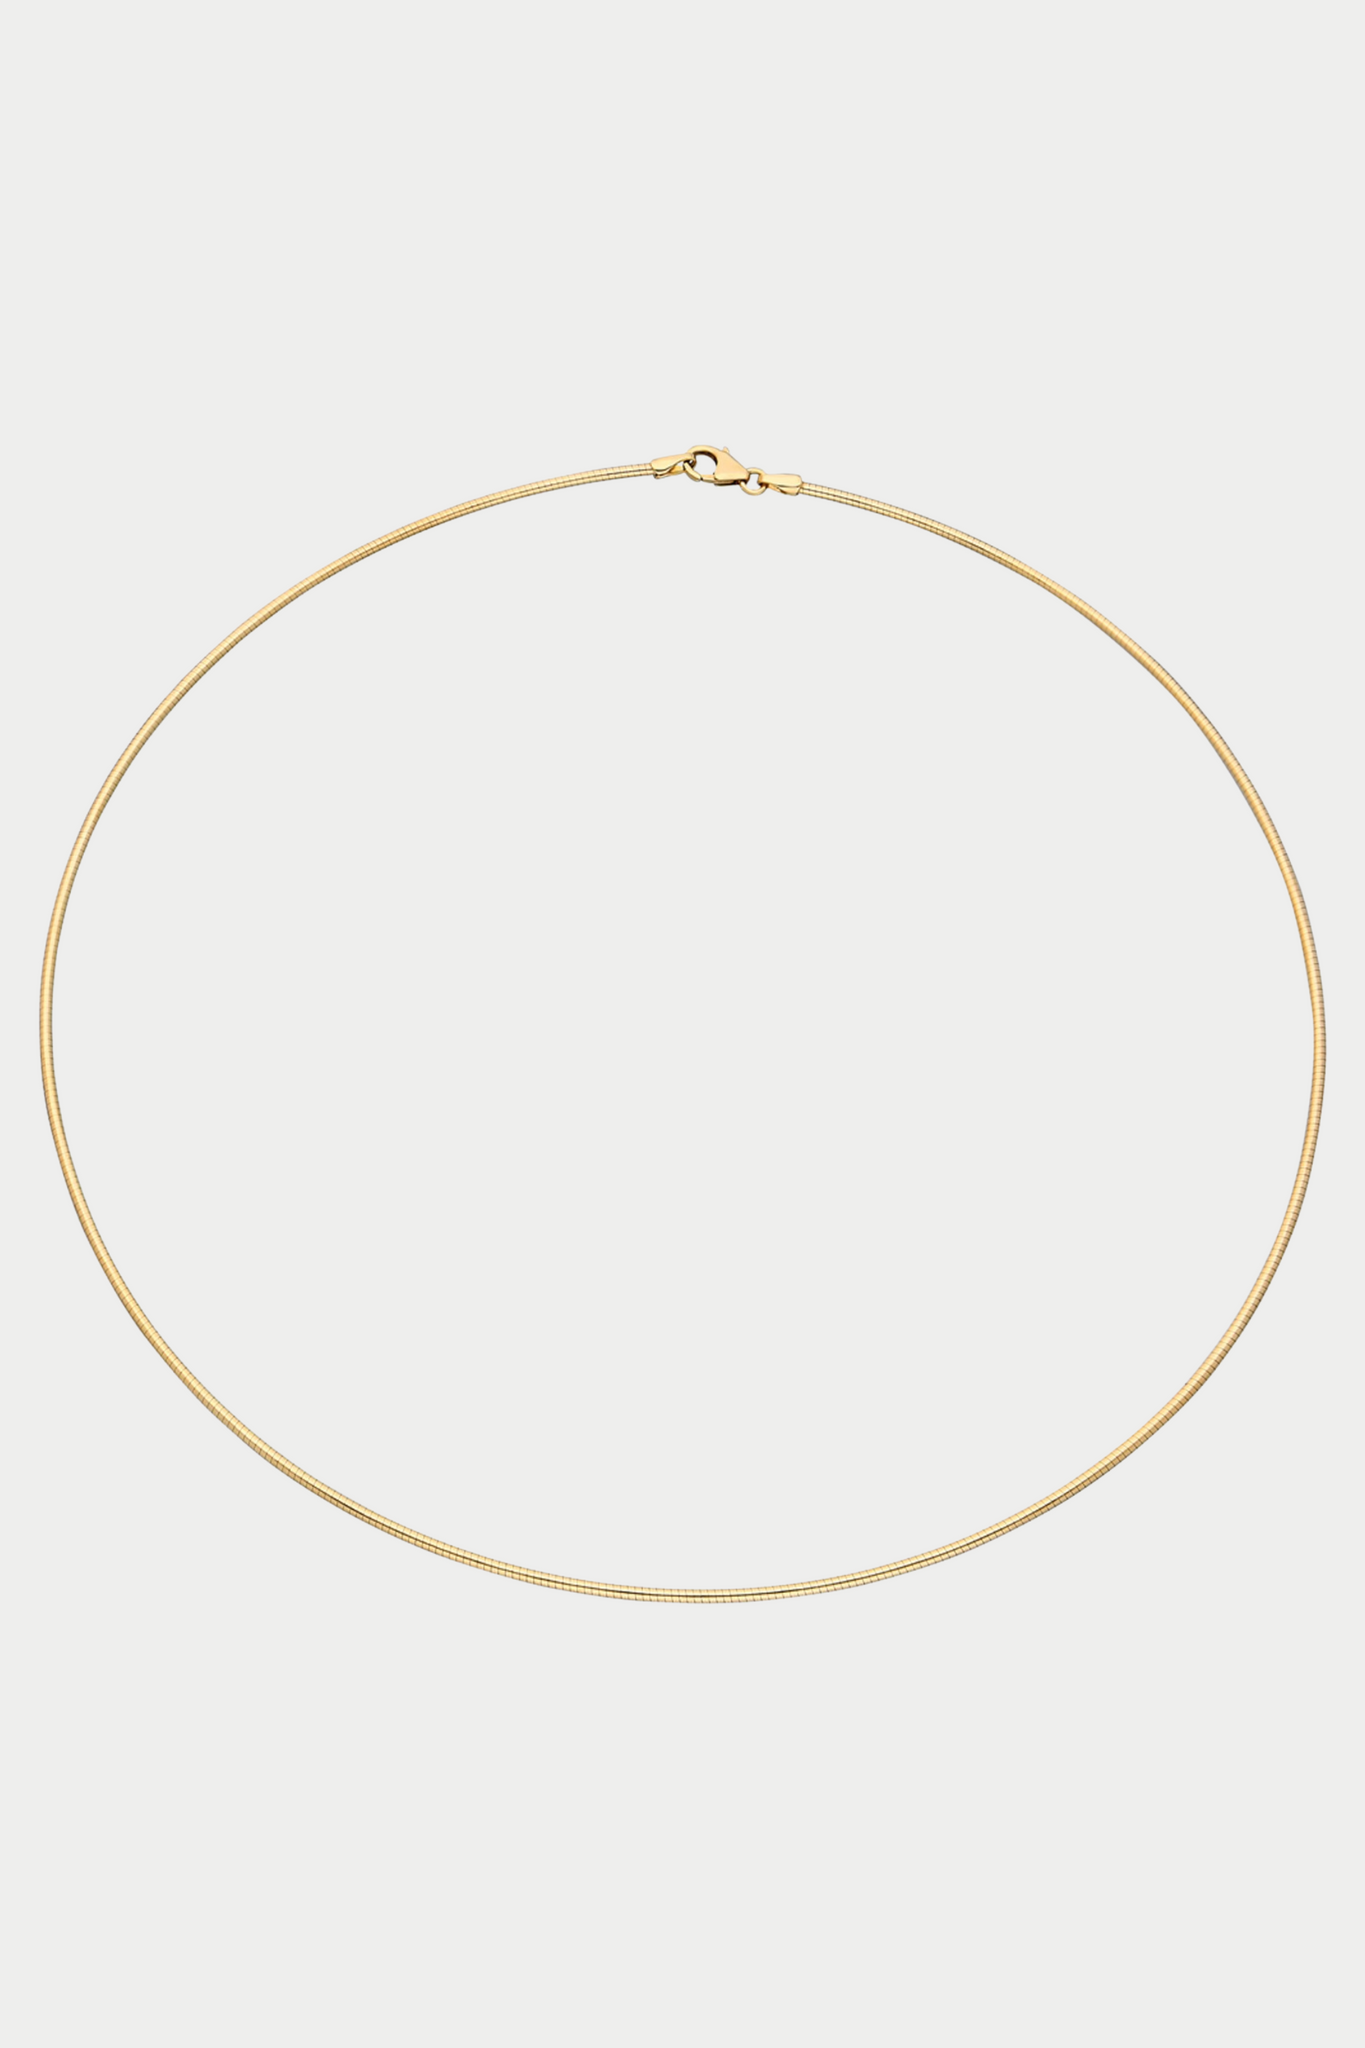 Ita - Omega Wire Necklace Chain, Yellow Gold